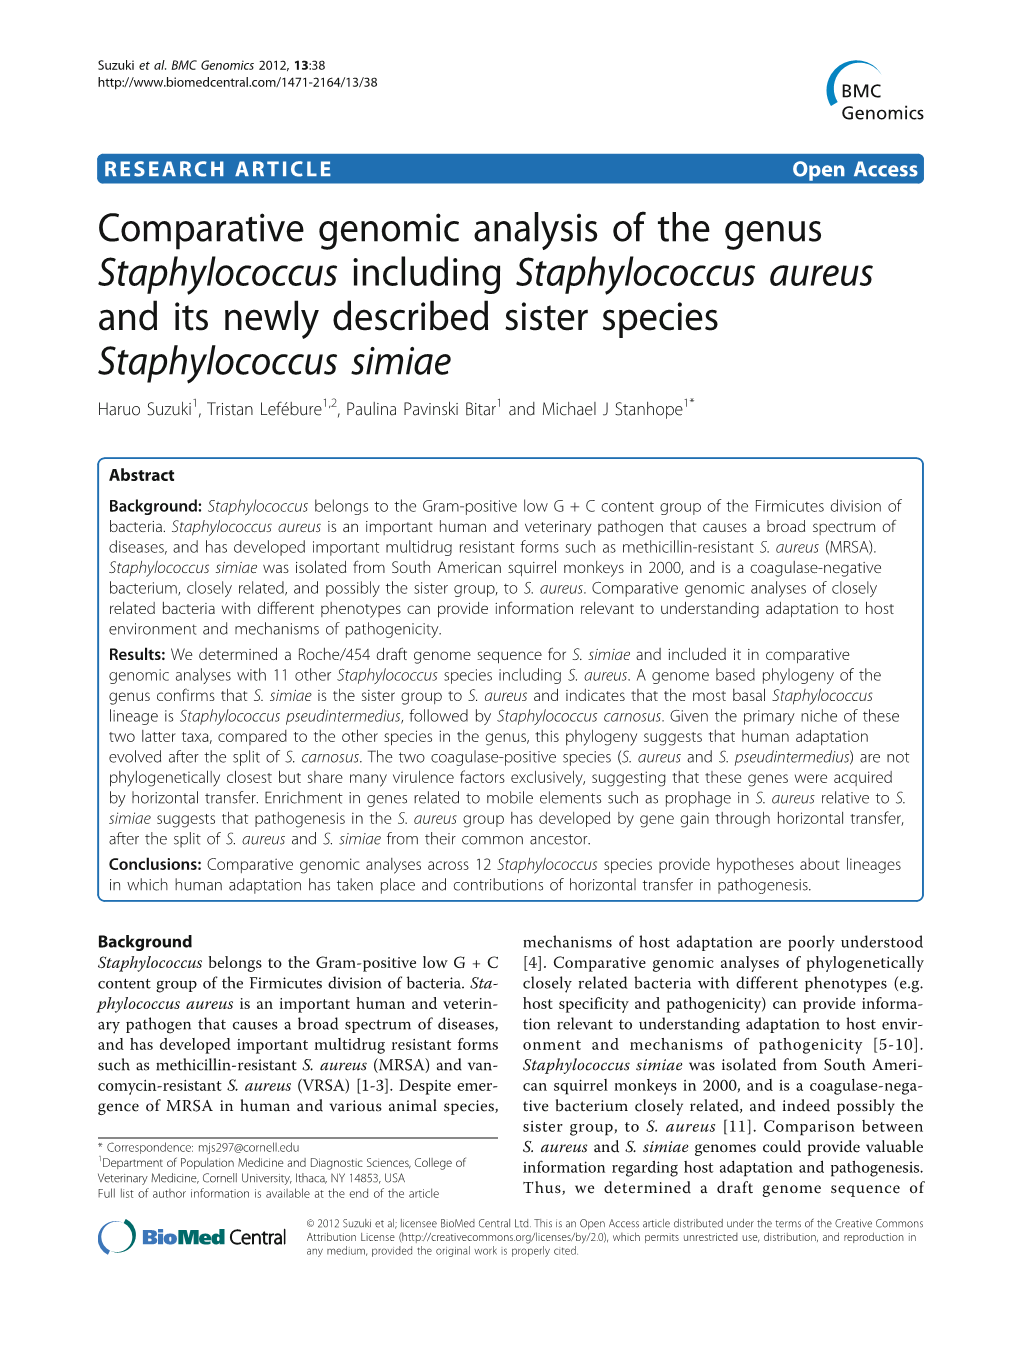 Comparative Genomic Analysis of the Genus Staphylococcus Including